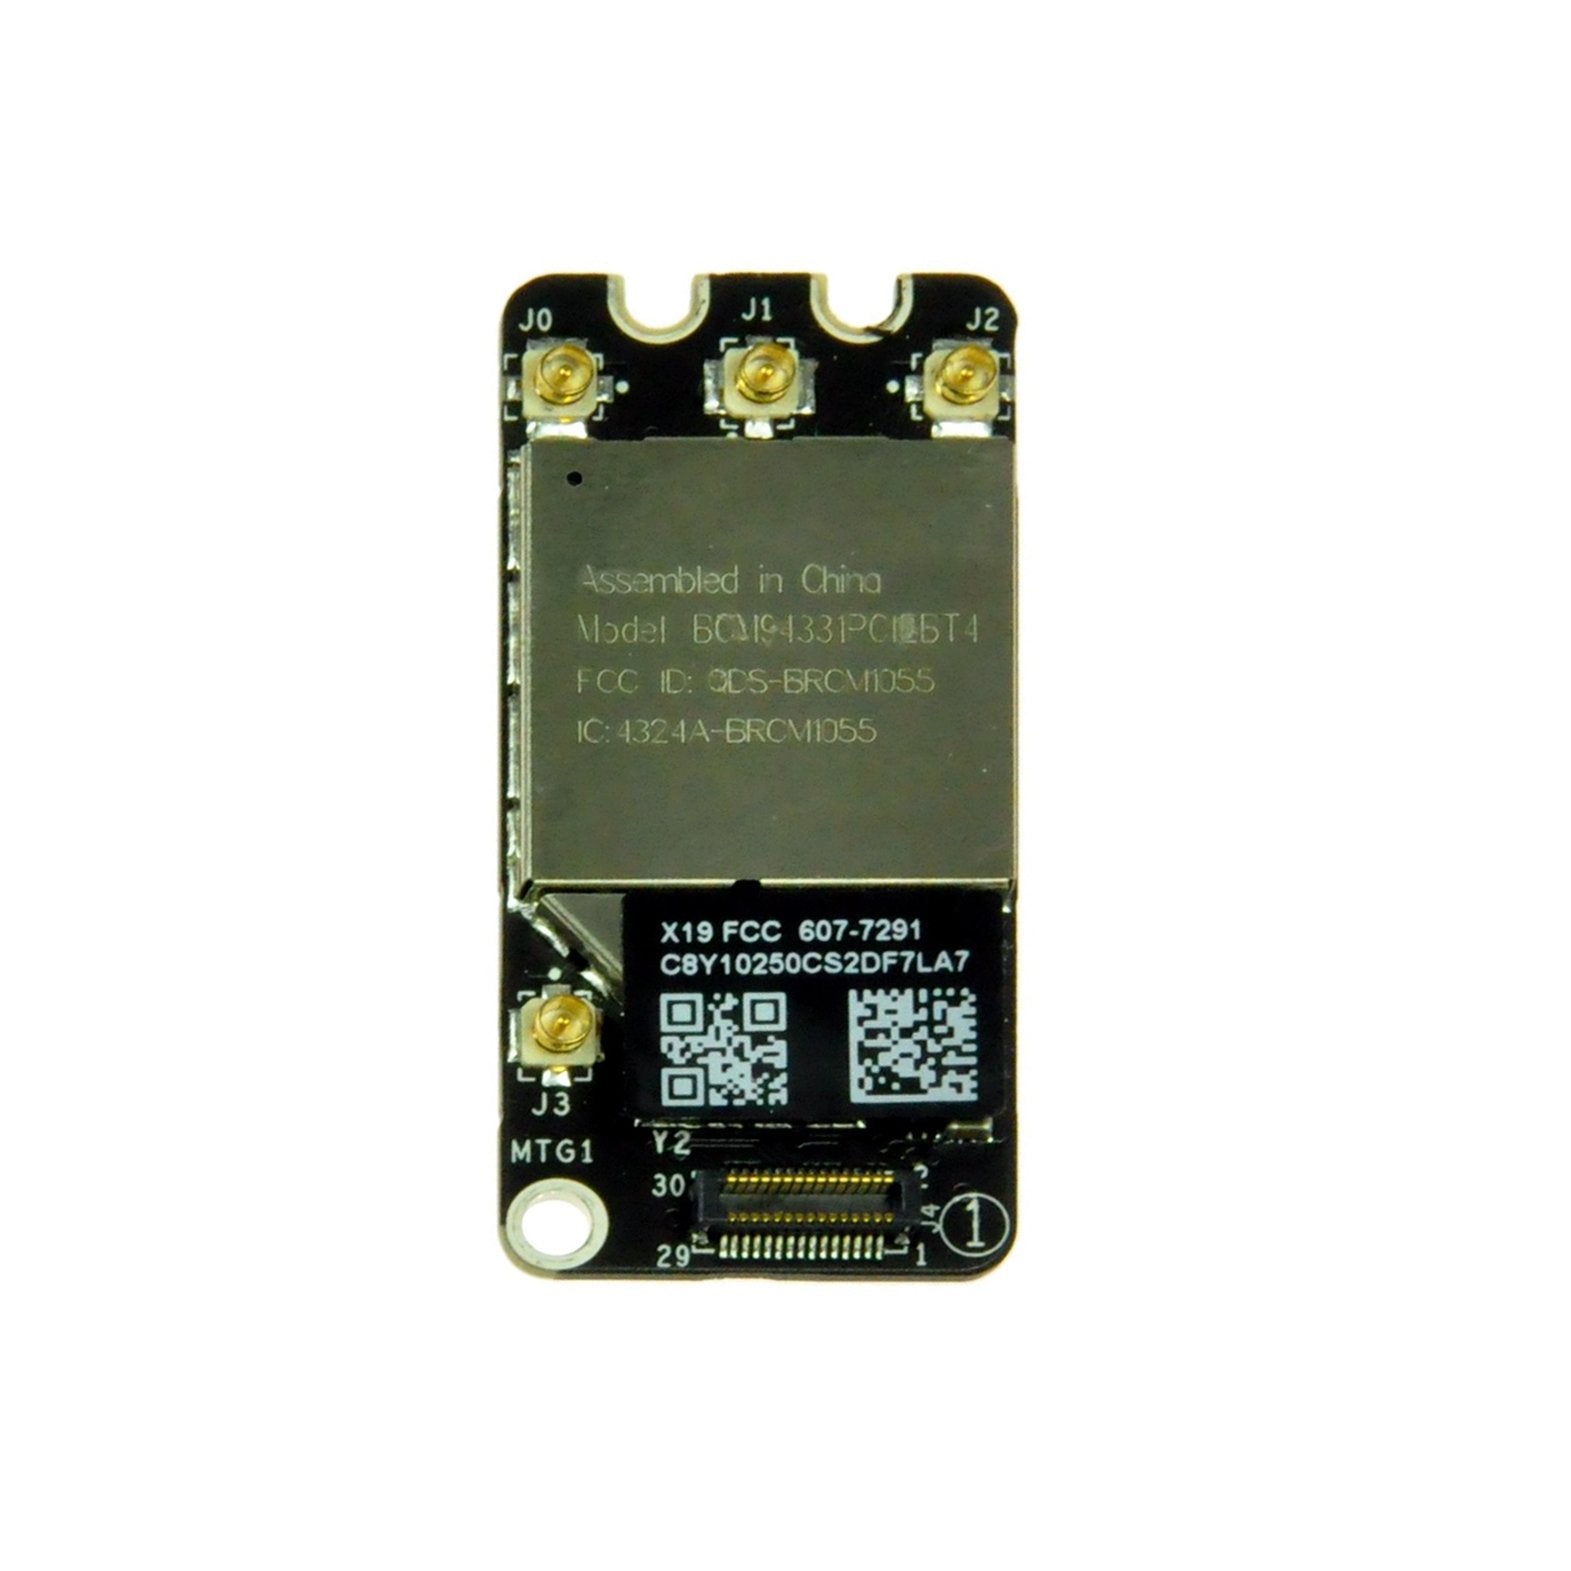 MacBook Pro Unibody (Early 2011-Mid 2012) AirPort/Bluetooth Board Used Bluetooth 2.1